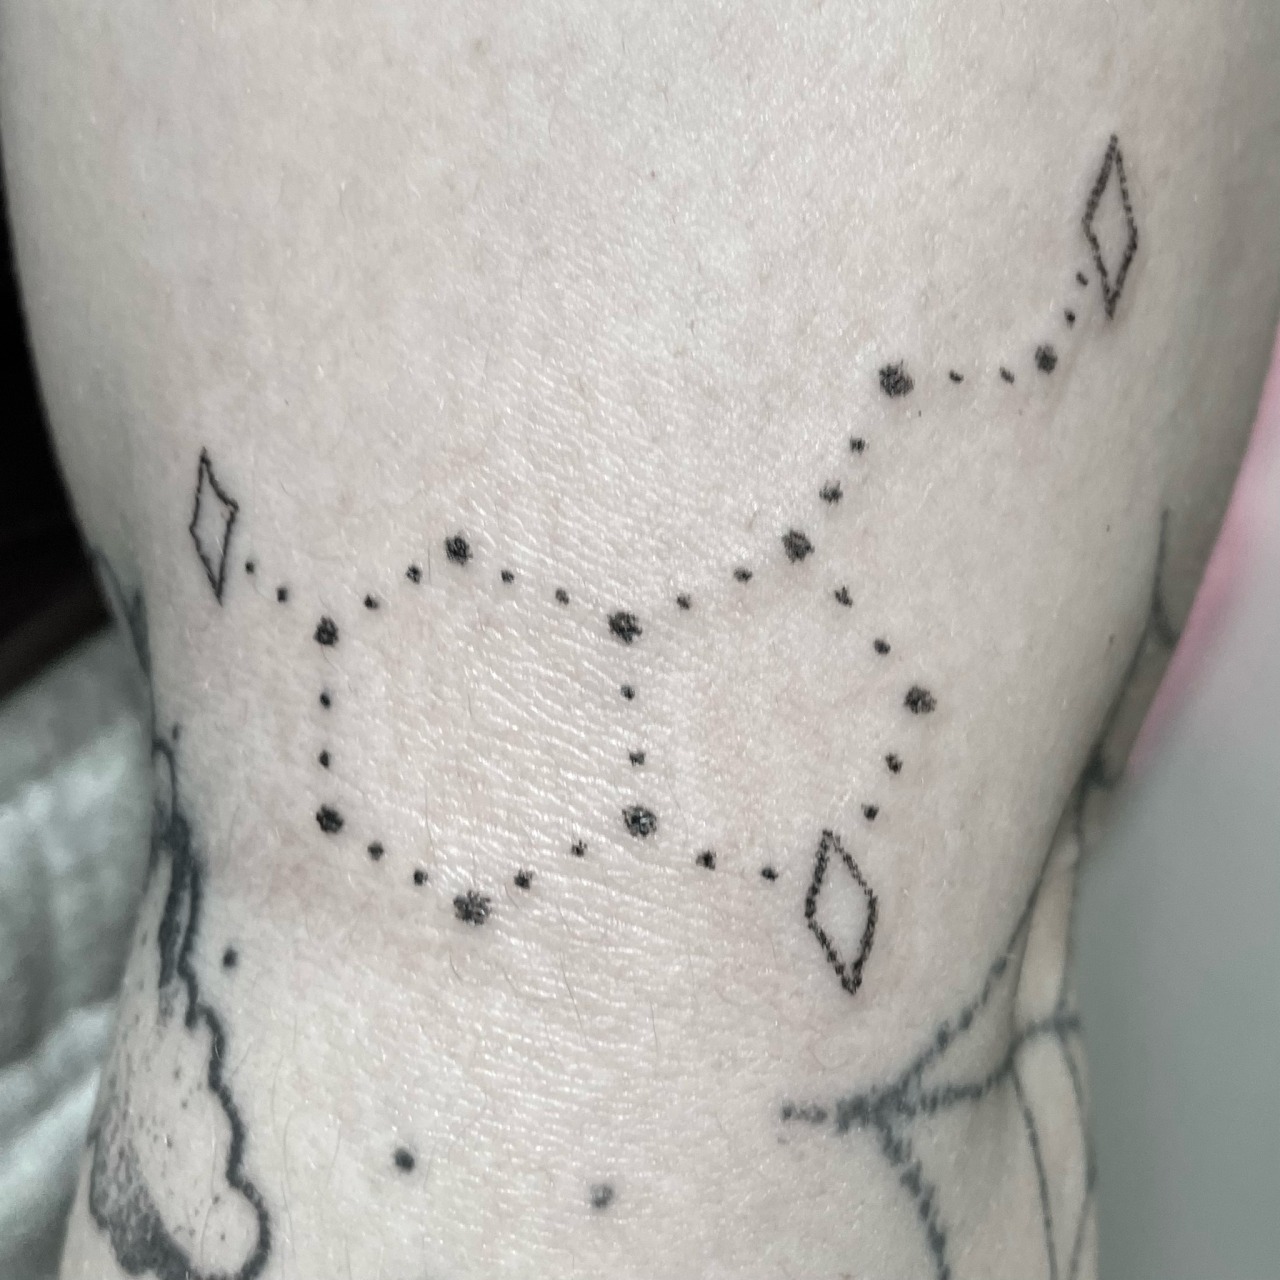 Aries constellation tattoo forming the word SEA